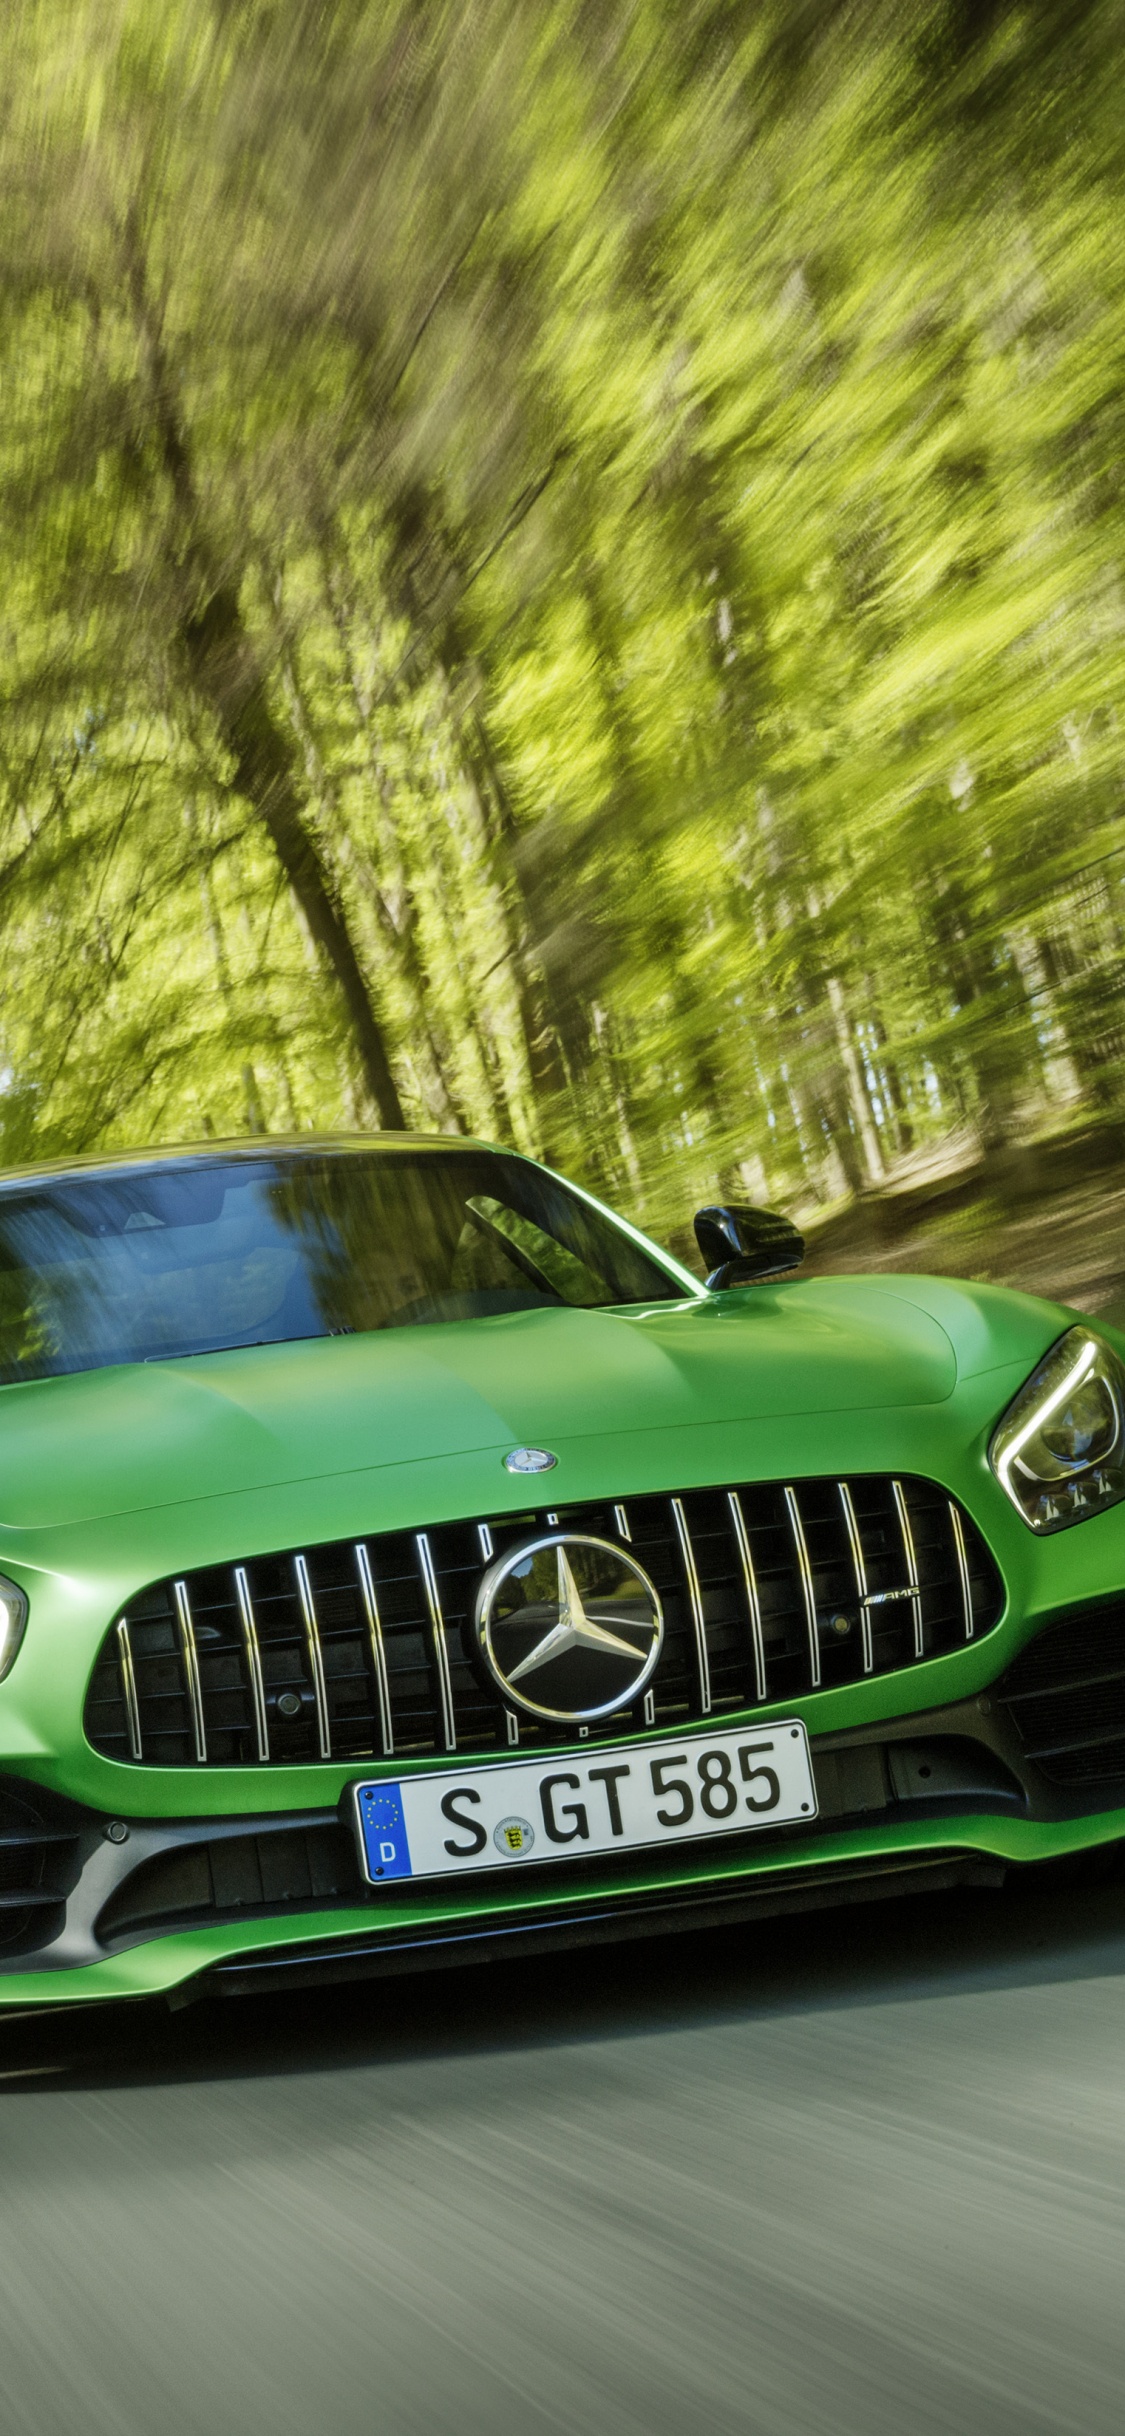 Green Mercedes Benz Car on Road During Daytime. Wallpaper in 1125x2436 Resolution